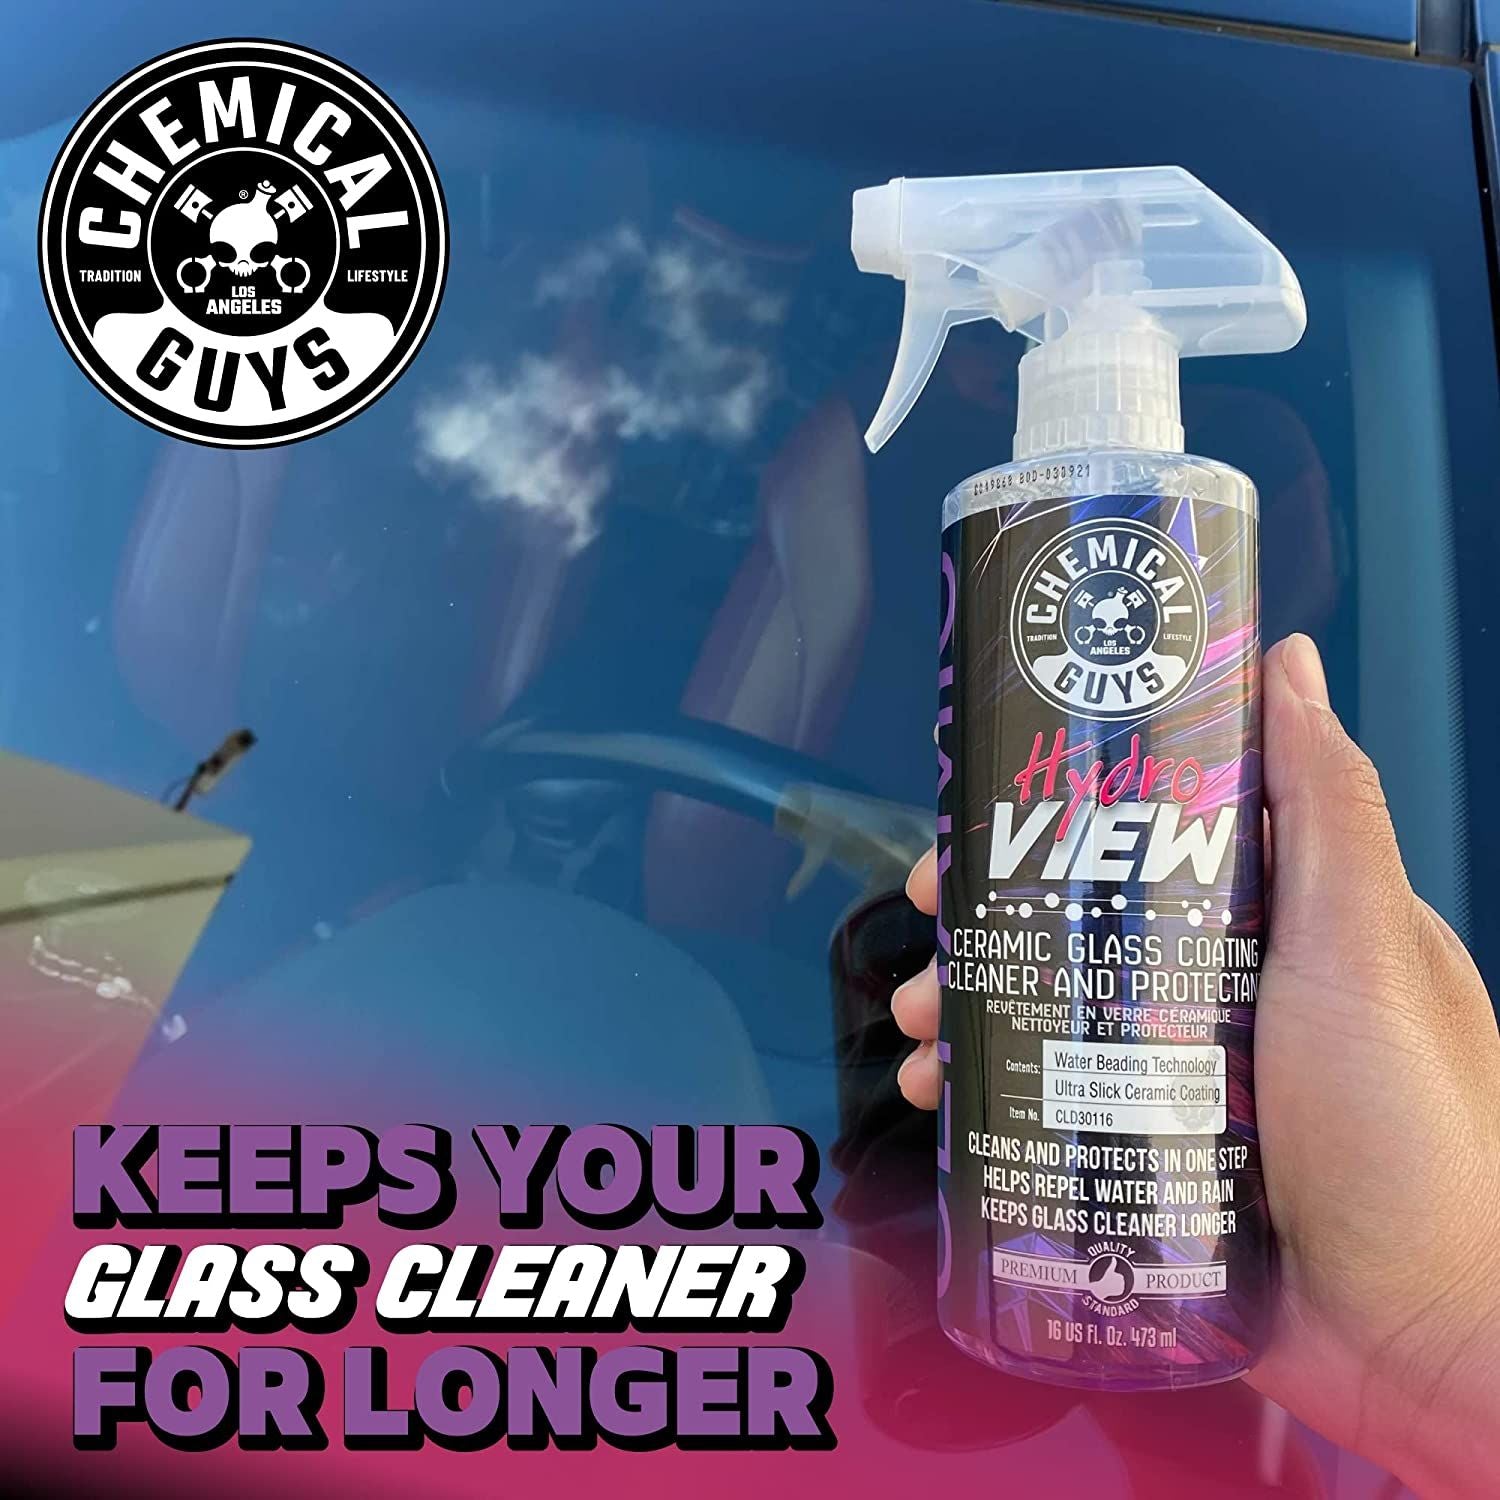 Chemical Guys HydroView Ceramic Glass Cleaner & Coating - 16oz - CLD30116